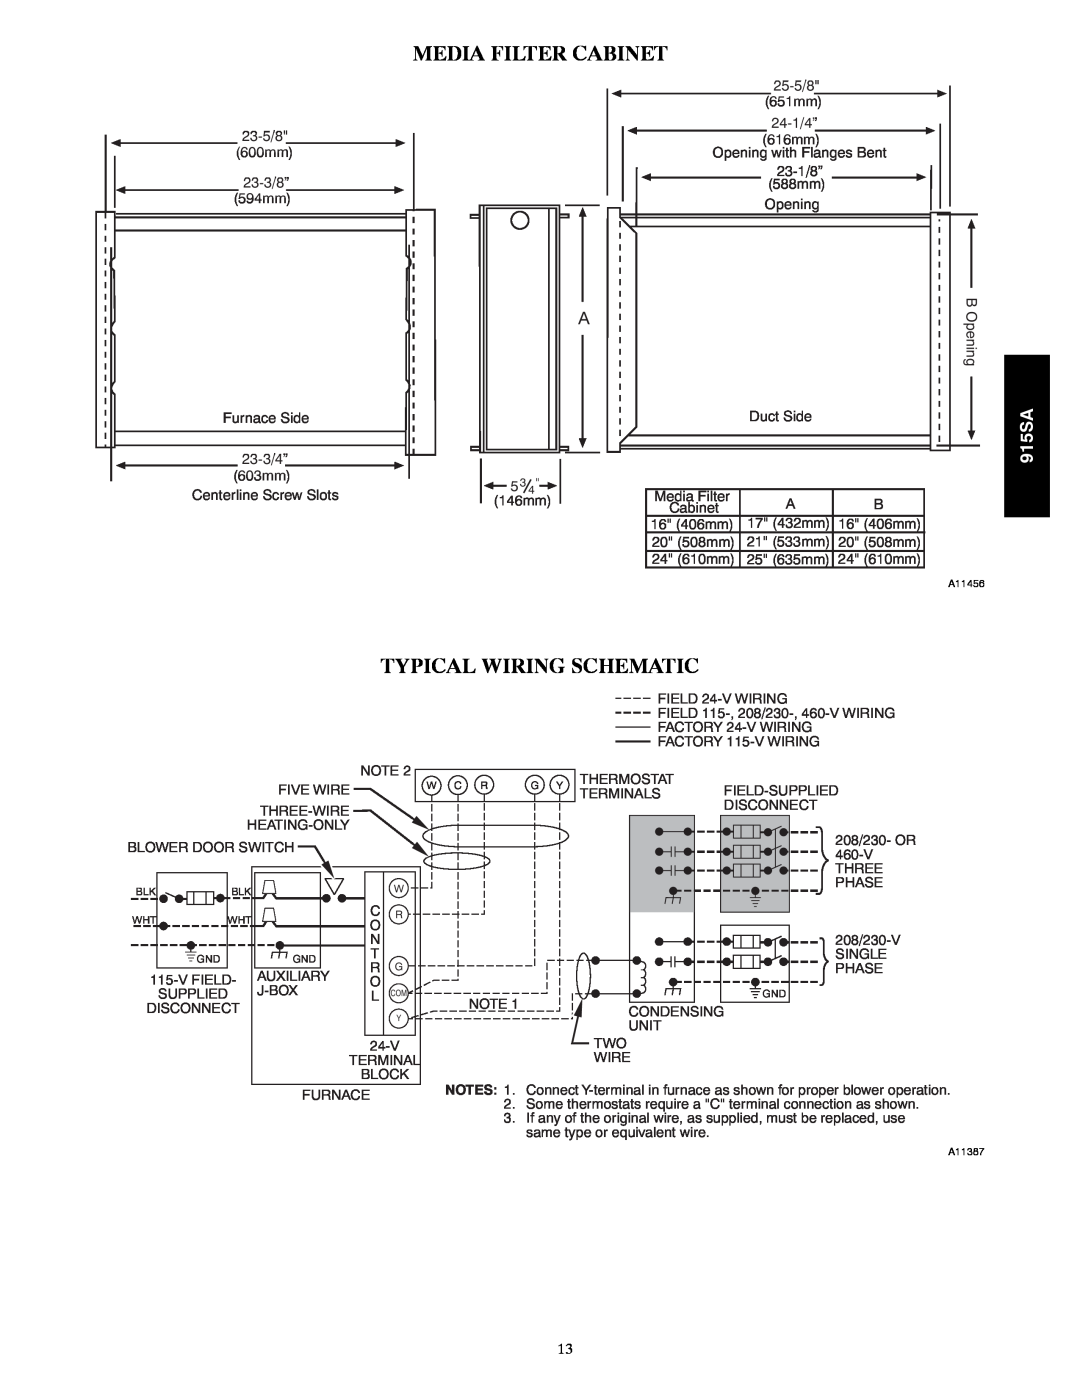 Bryant warranty Media Filter Cabinet, Typical Wiring Schematic, 915SA 